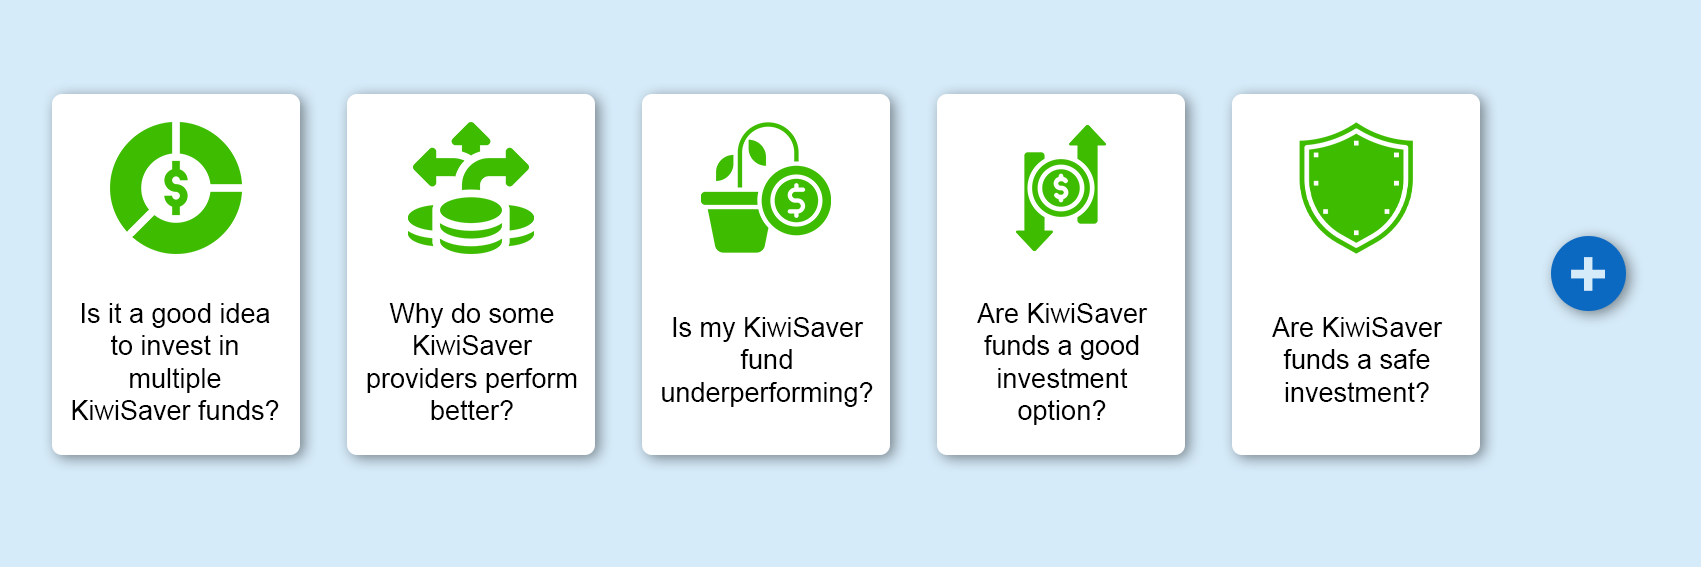 KiwiSaver Funds - Frequently Asked Questions